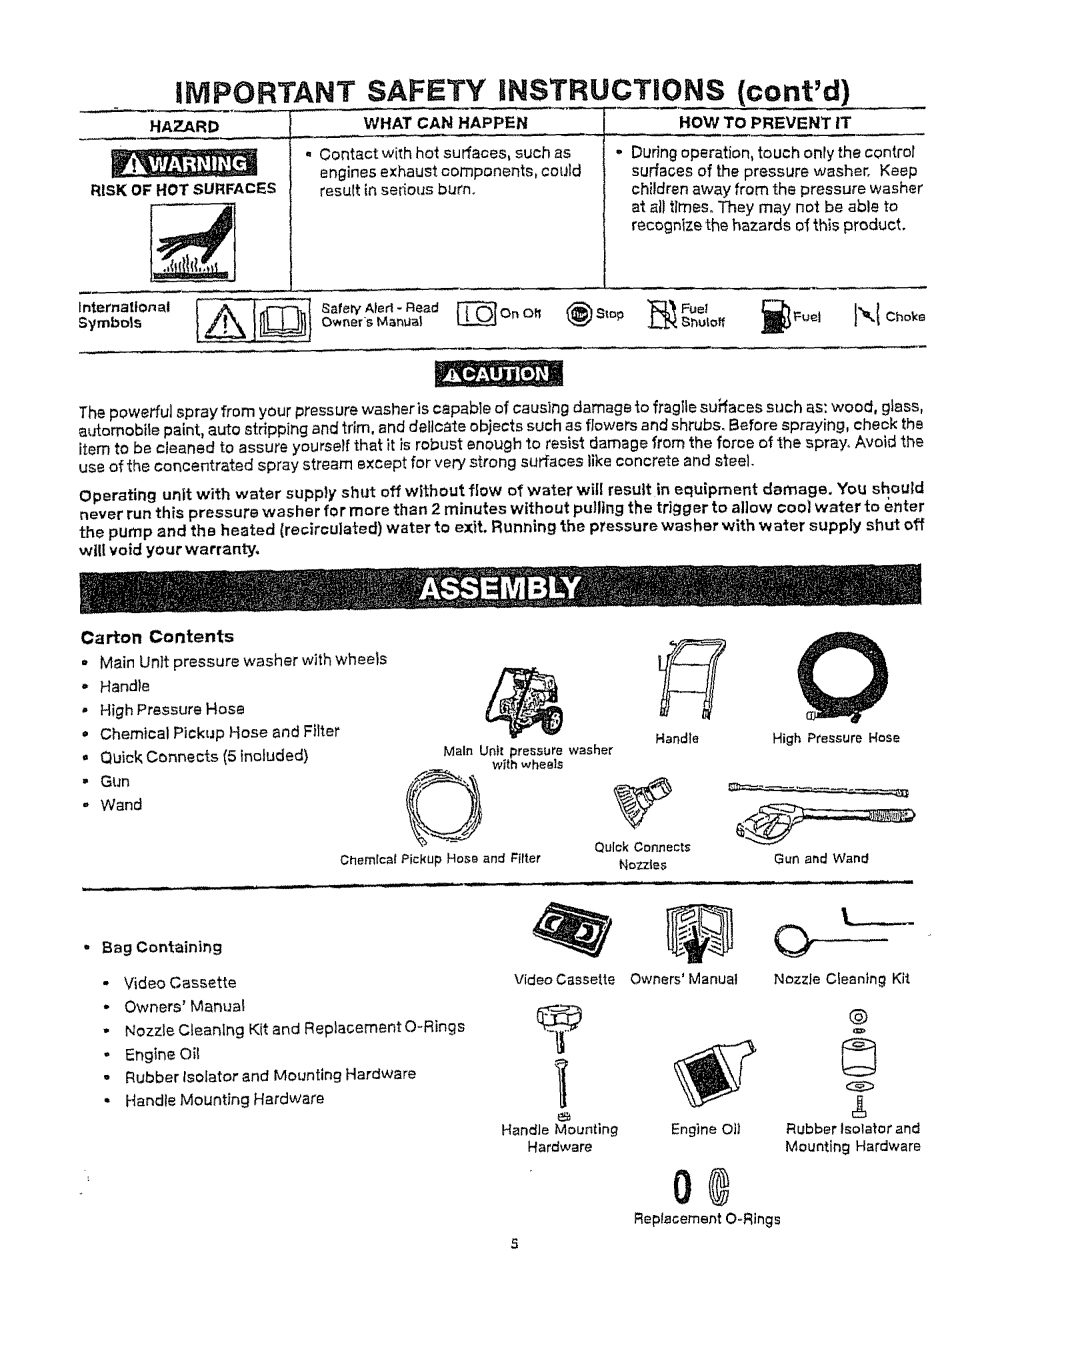 Craftsman 919.76902 manual iMPORTANT SAFETY iNSTRUCTiONS tonid, Internatlon ai, Carton Contents, Chemical Pickup, included 